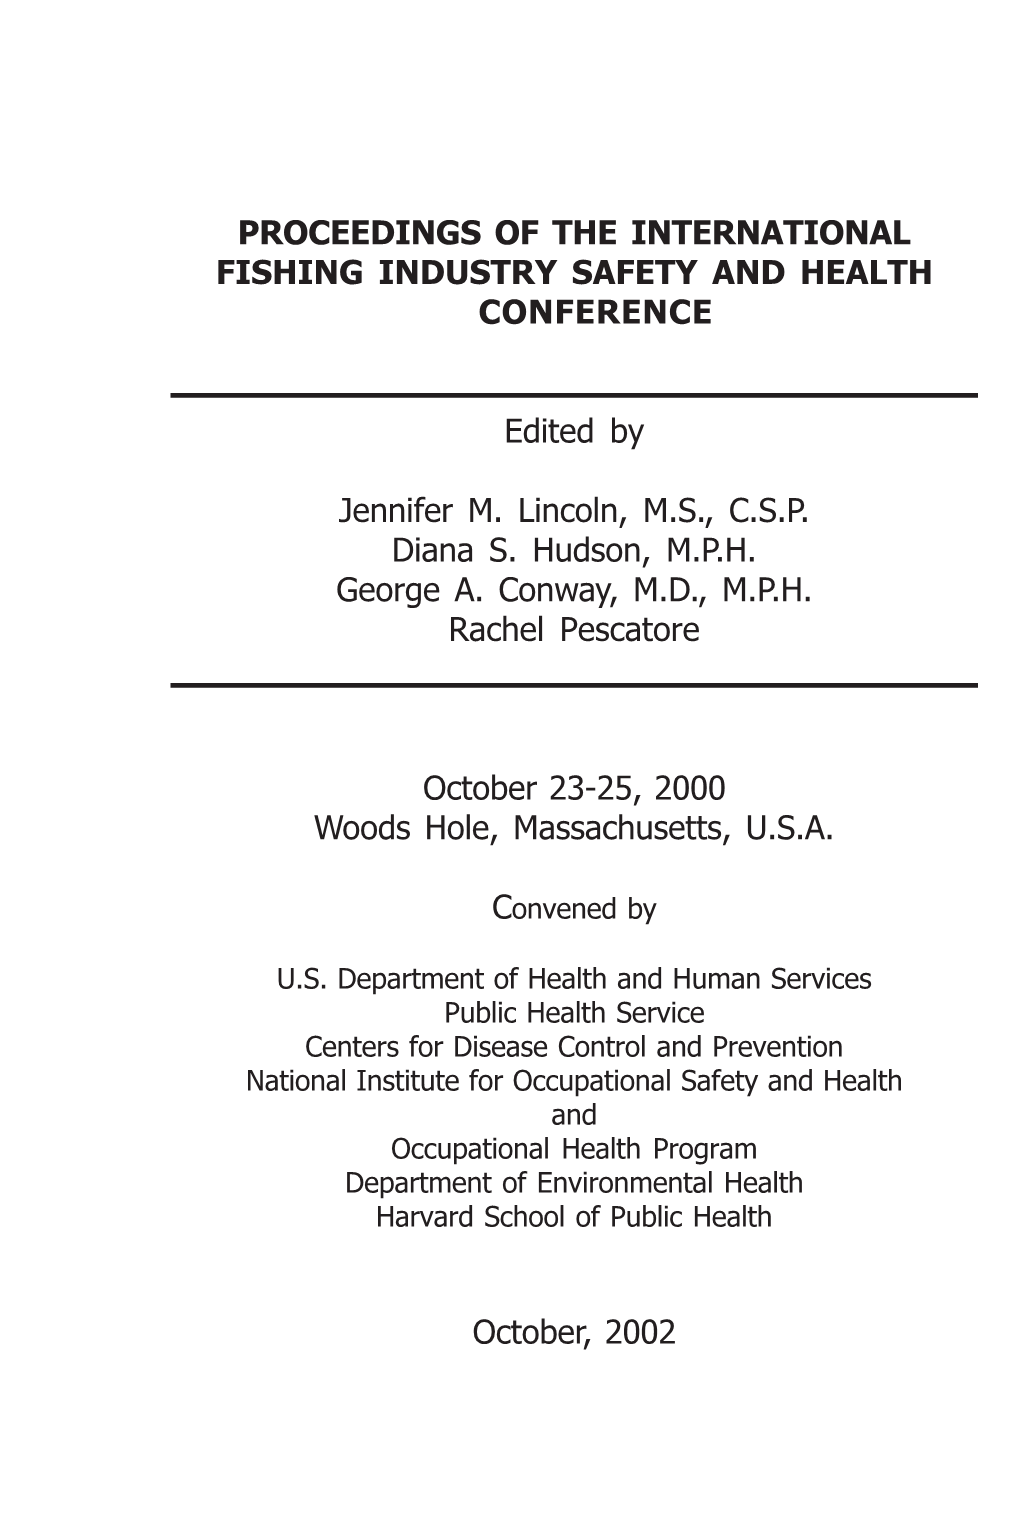 Proceedings of the International Fishing Industry Safety and Health Conference